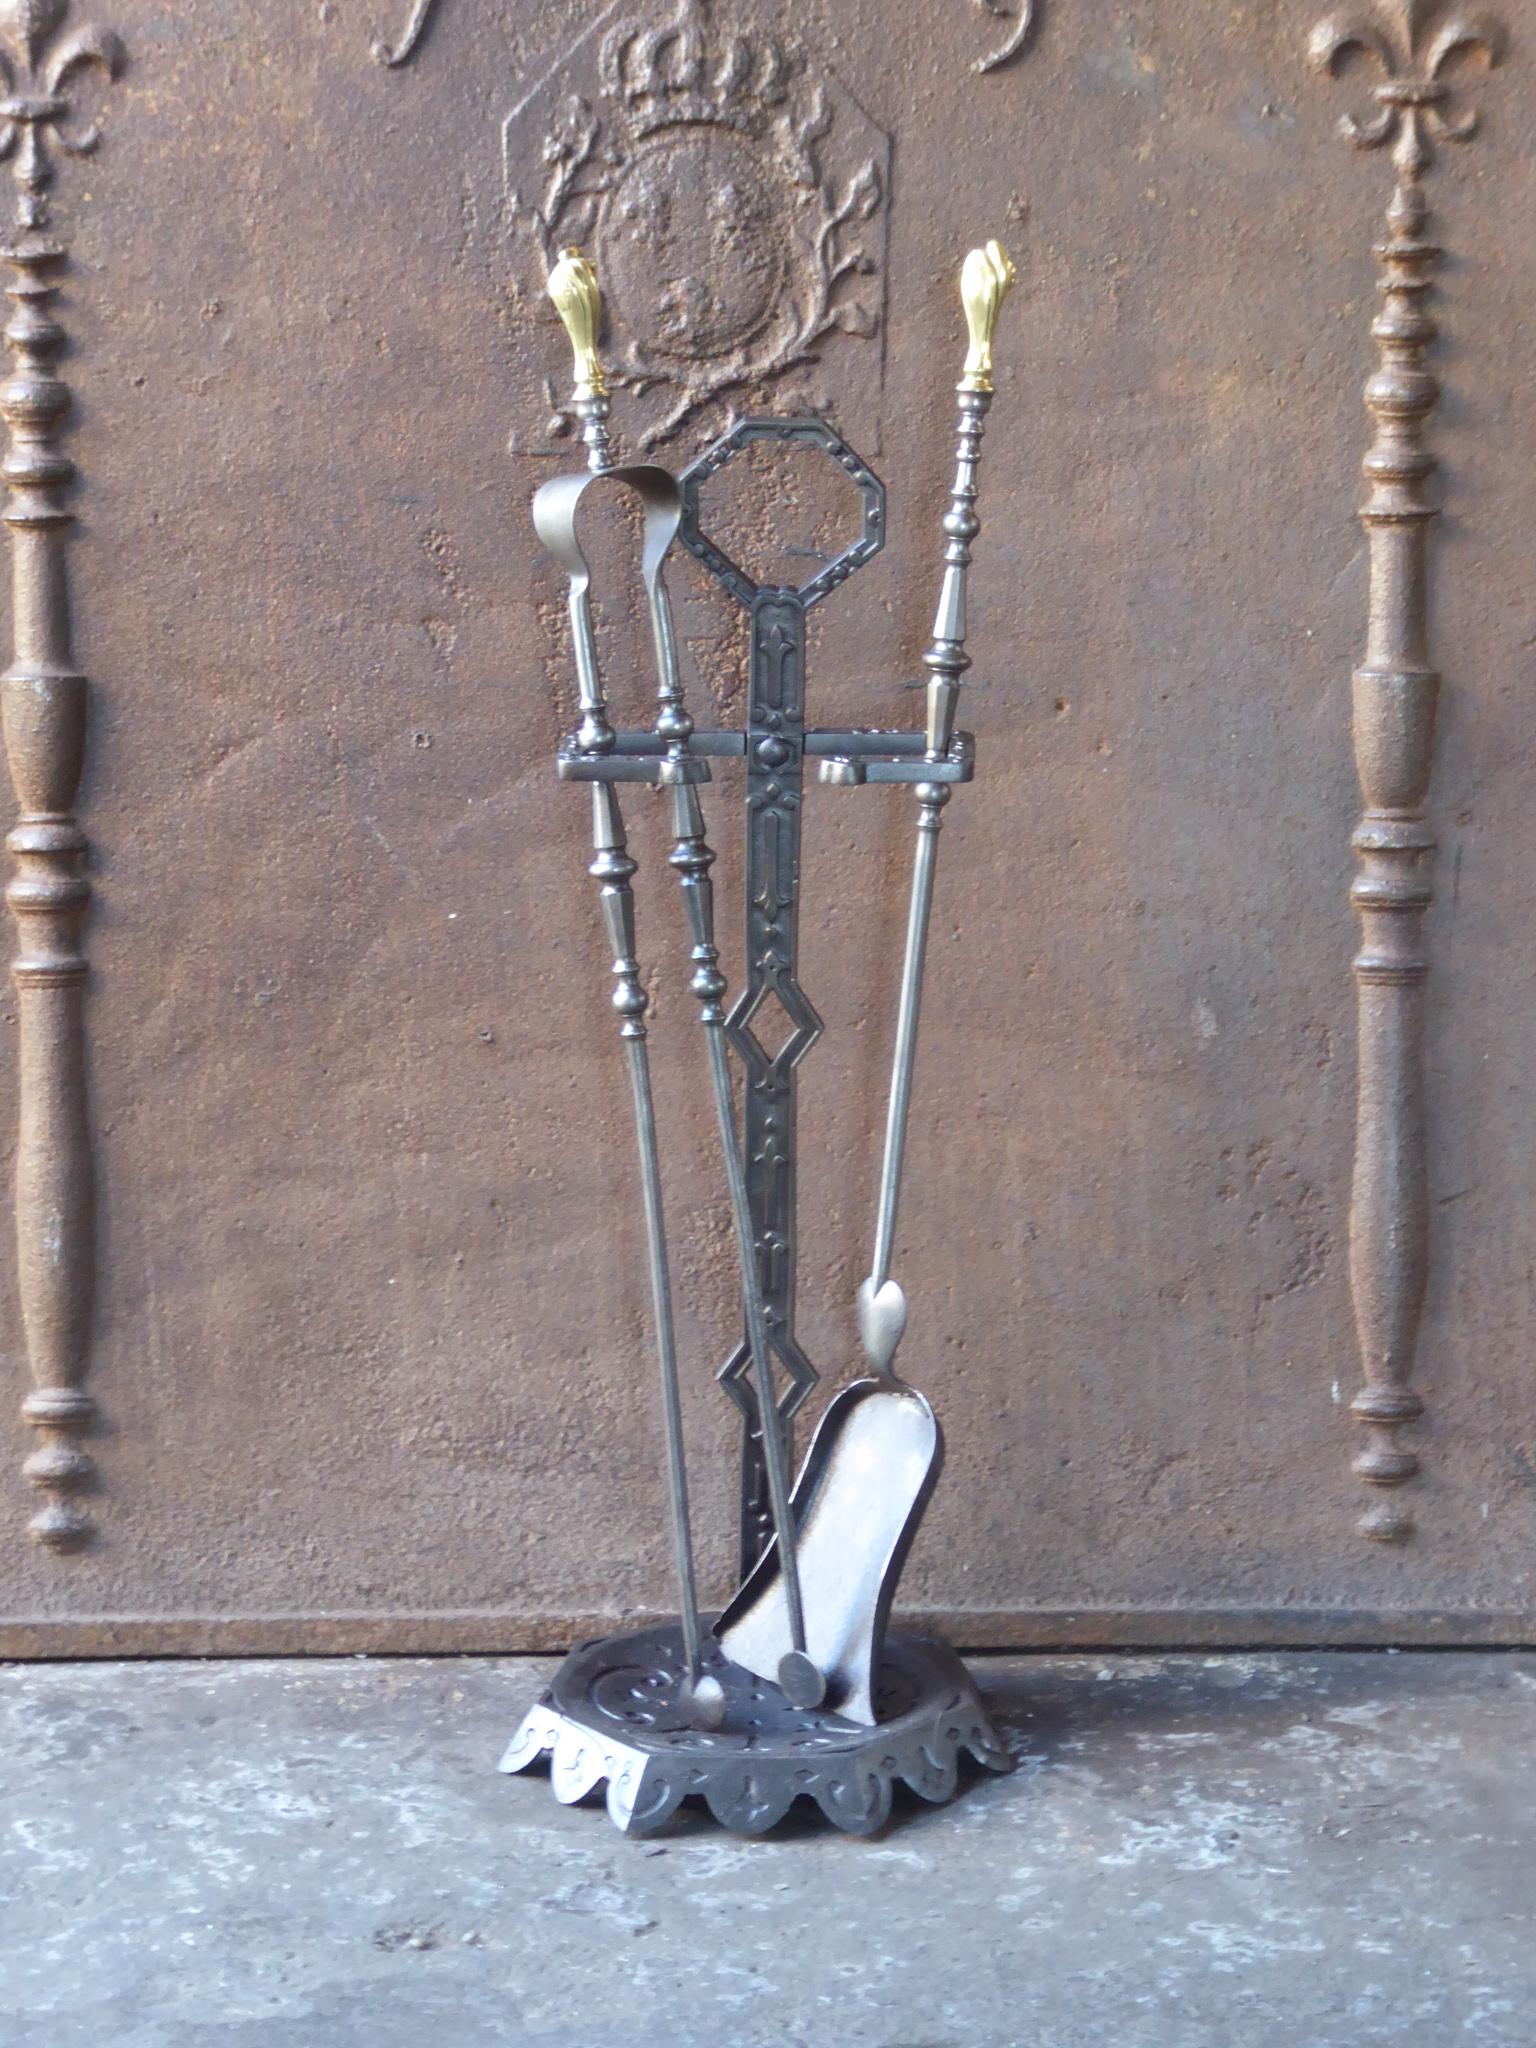 Late 19th or early 20th century French Napoleon III fireplace tool set. The toolset consists of a stand and two fire irons. Made of wrought iron, brass and cast iron. It is in a good condition and is fully functional.
 
 





 